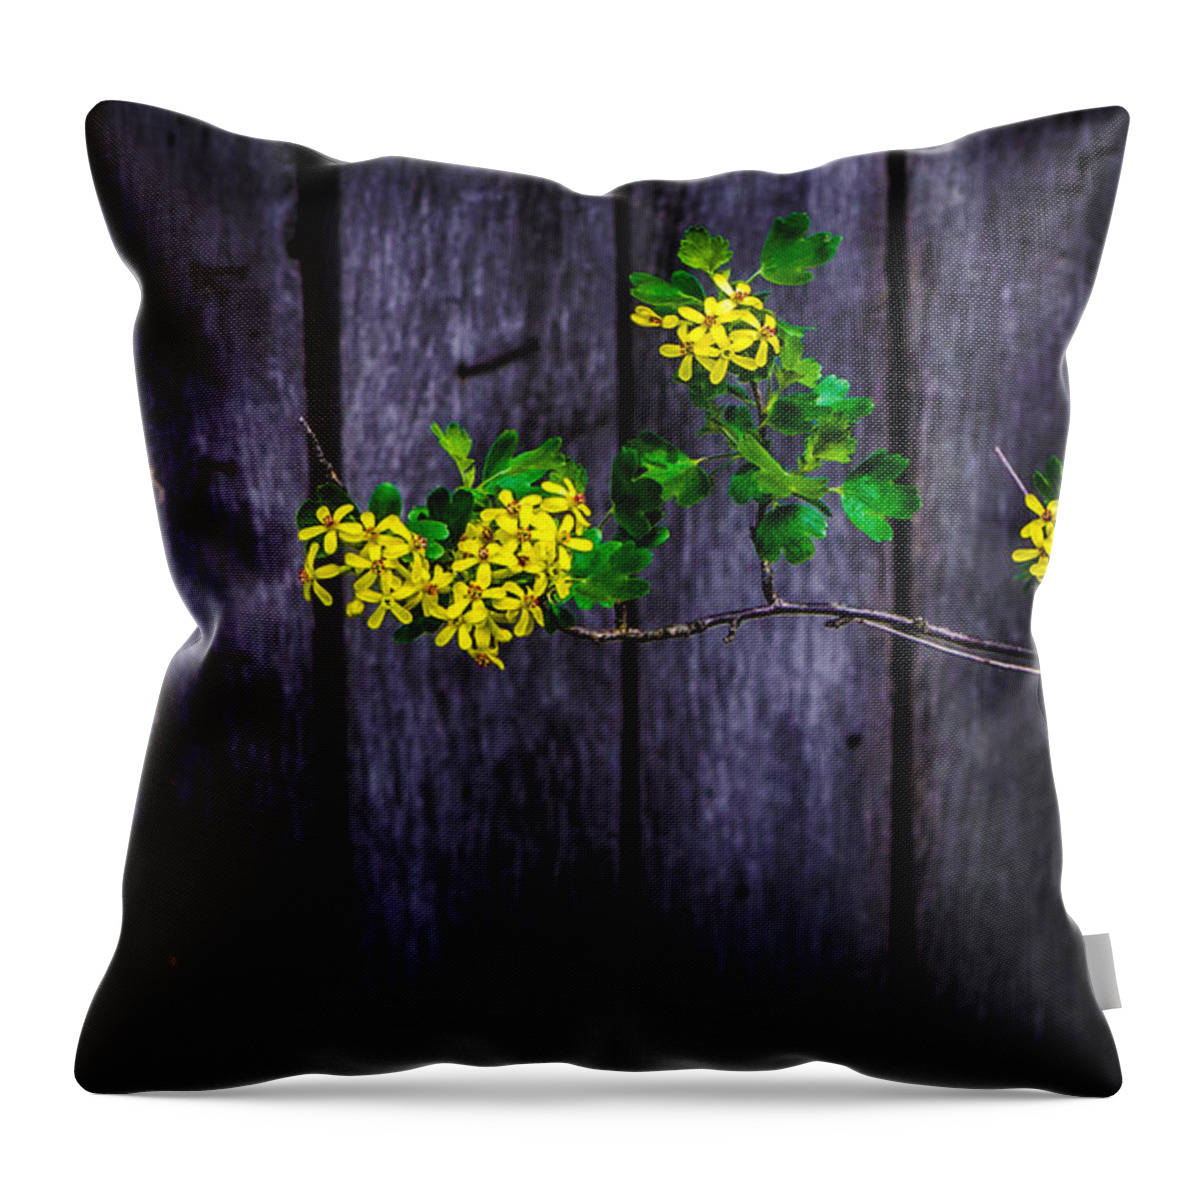 Barn Throw Pillow featuring the photograph Flowers On Abandoned Farm House by Michael Arend